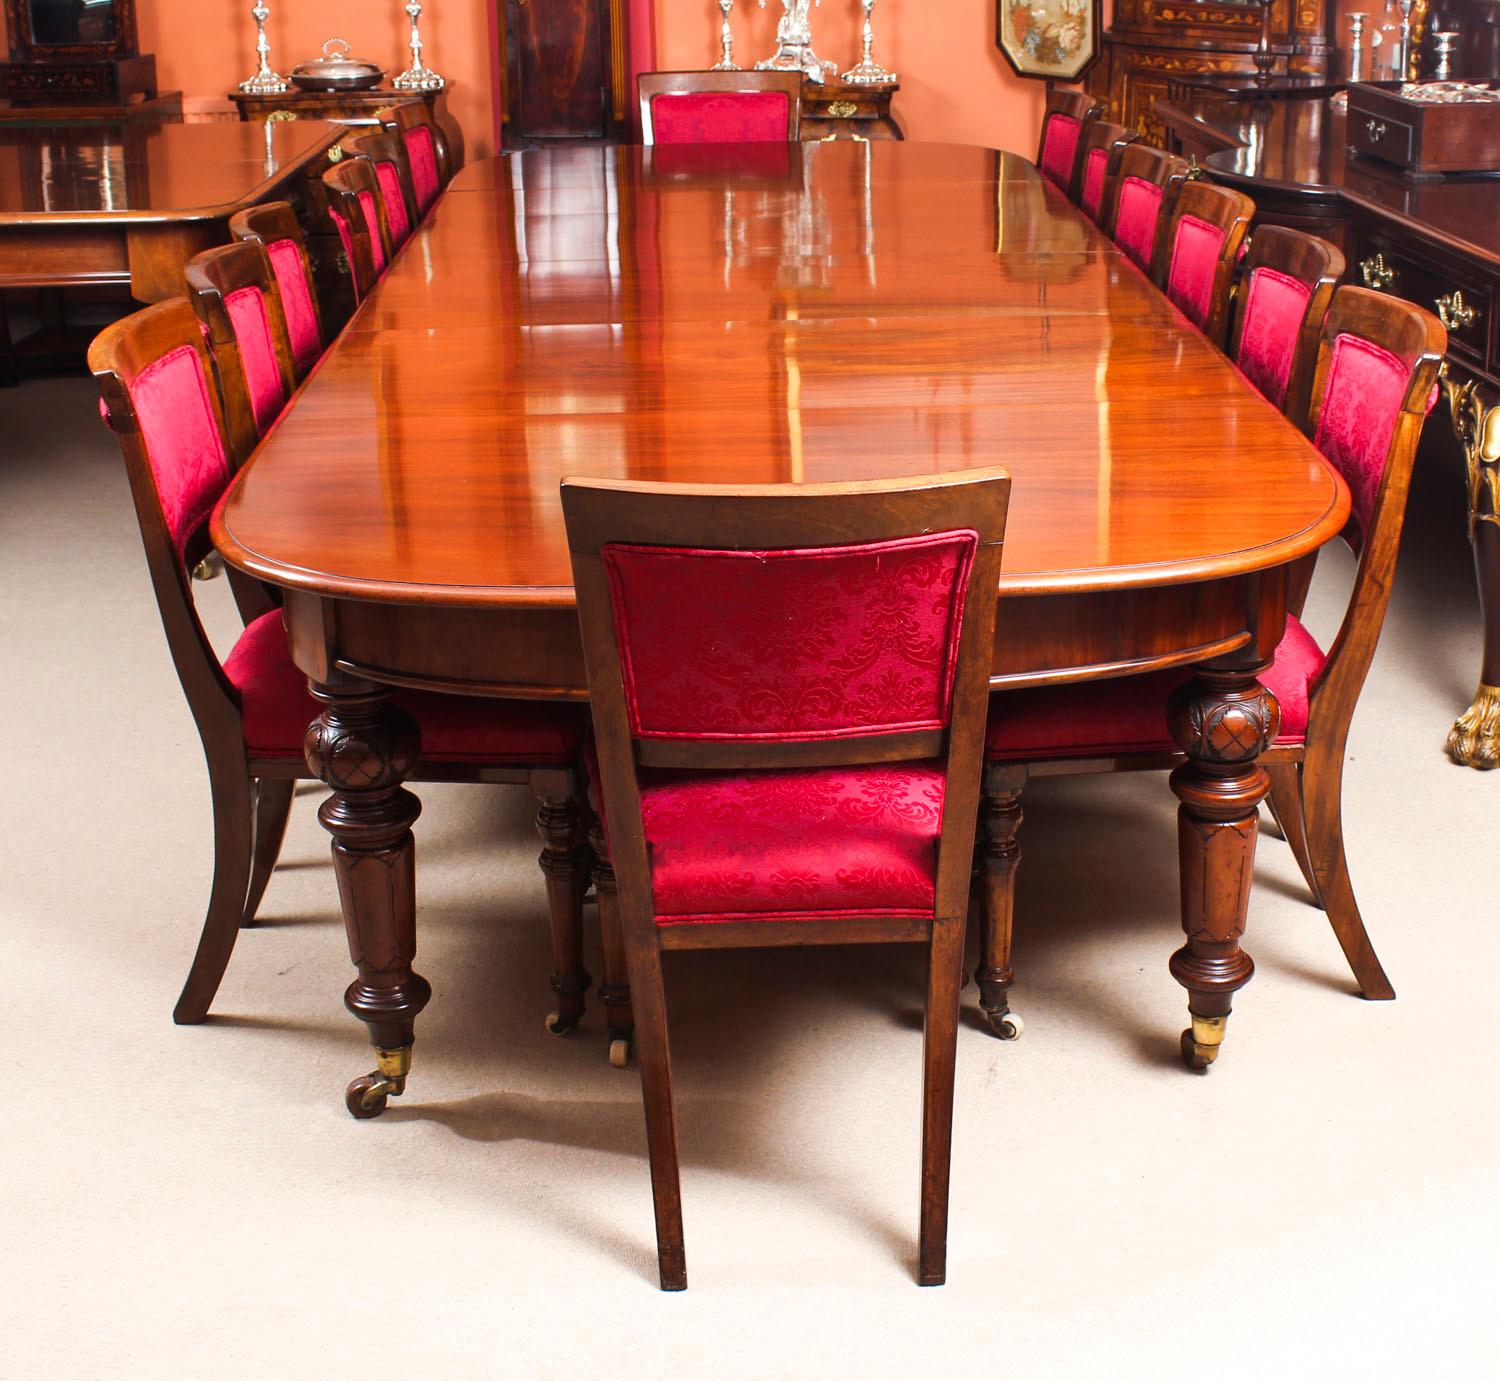 This is a fantastic dining set comprising an antique Victorian solid mahogany D-end dining table with a set of fourteen antique upholstered back dining chairs, all circa 1870 in date.

The beautiful table is in stunning flame mahogany and has four